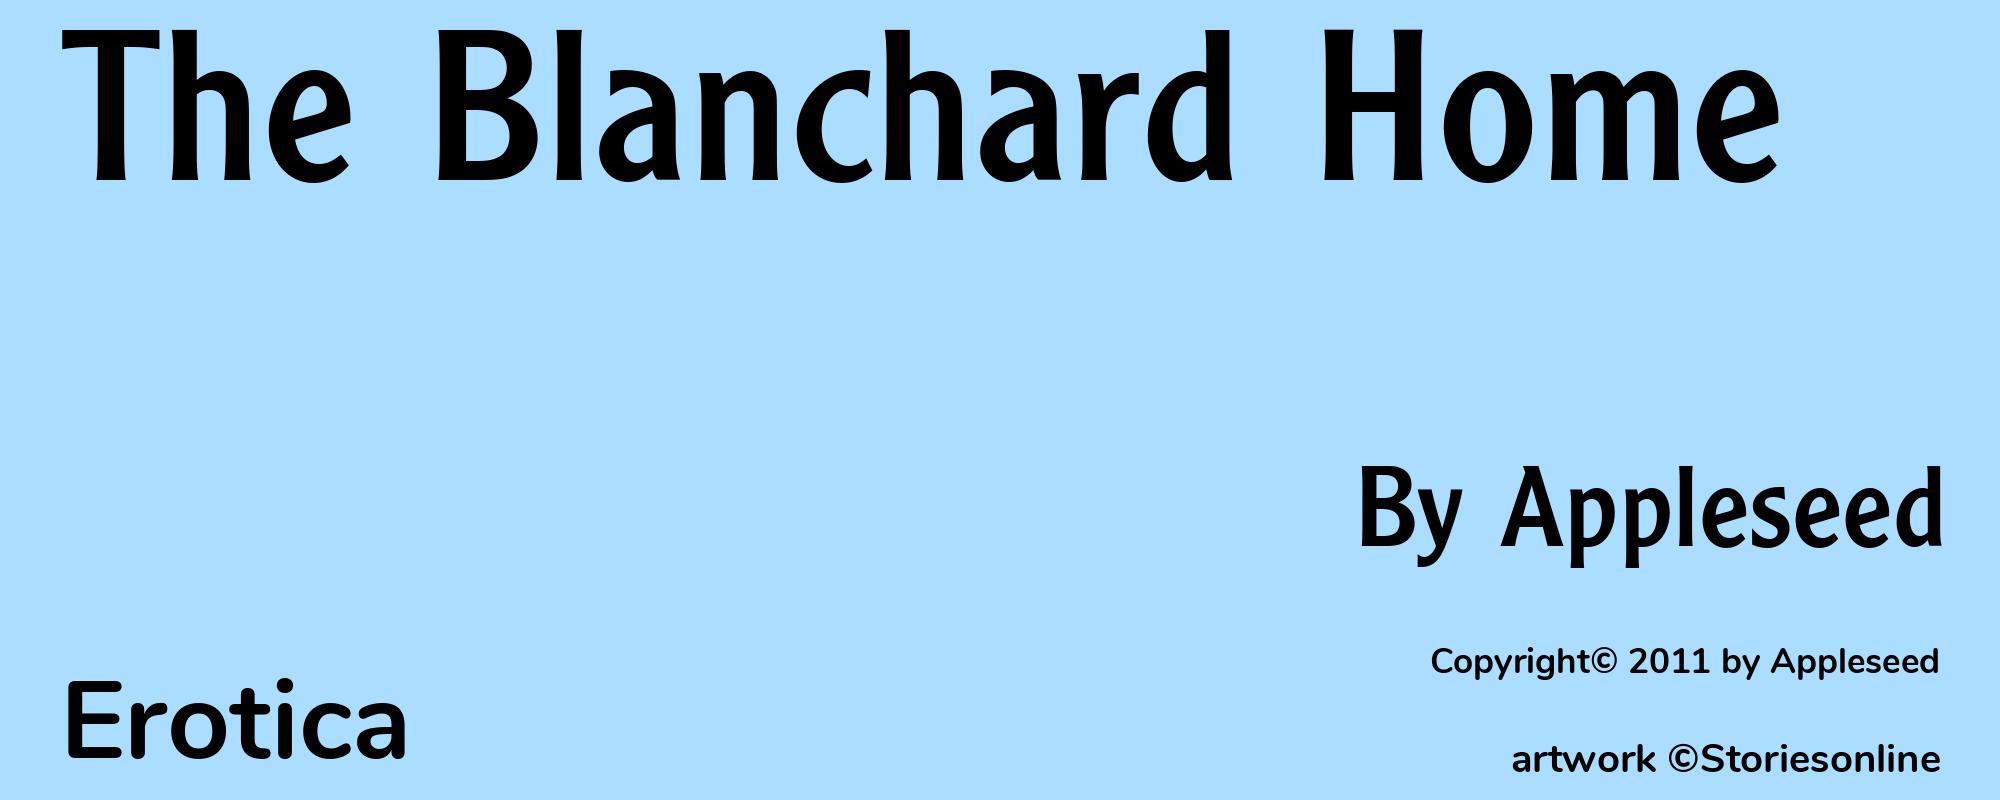 The Blanchard Home - Cover